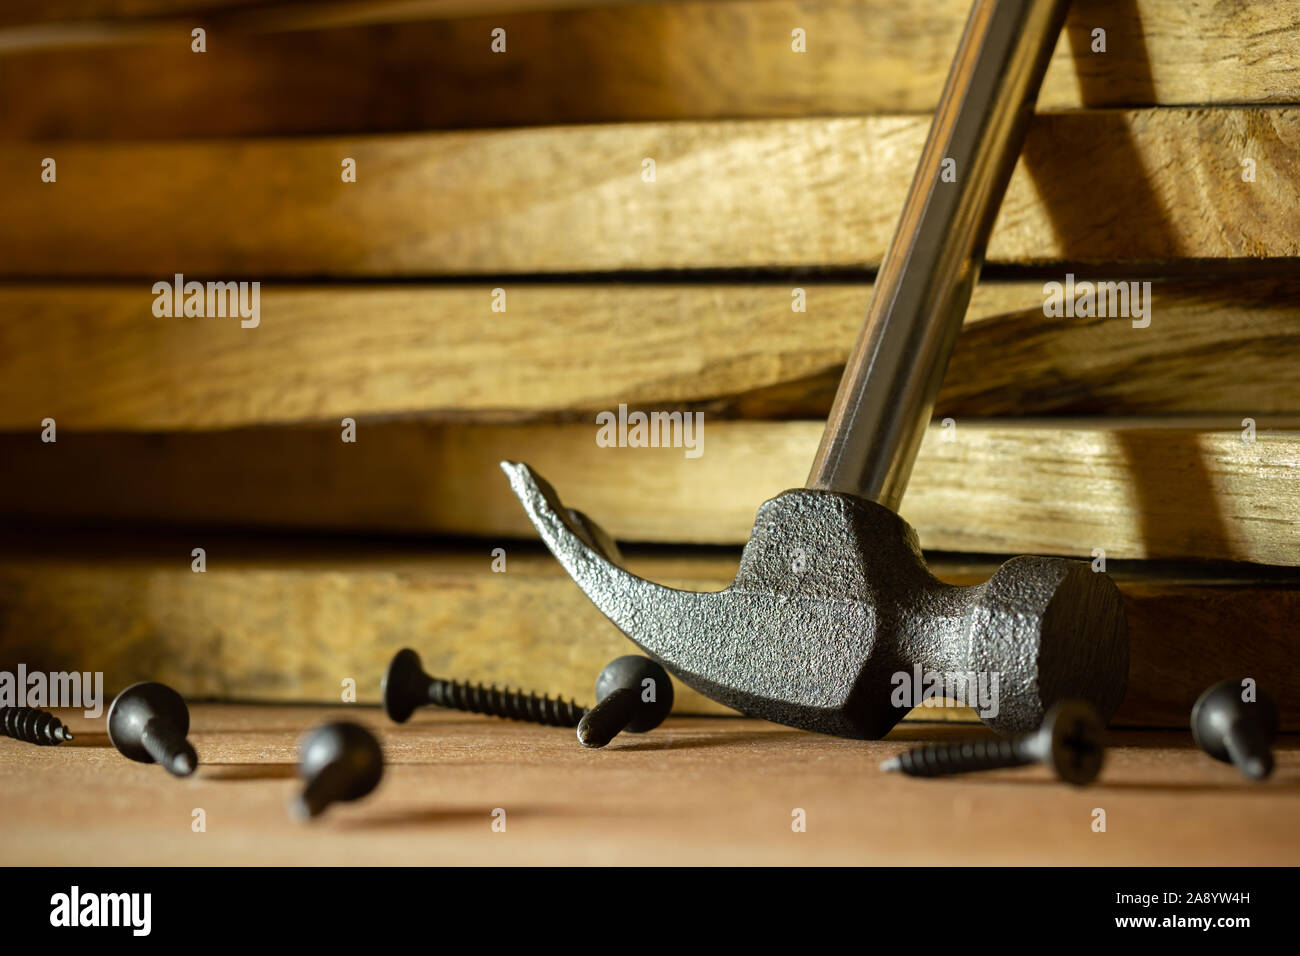 Hammer and screw on lumber in lighting and shadow of the sunshine in morning. The concept of woodcraft or carpentry. Stock Photo